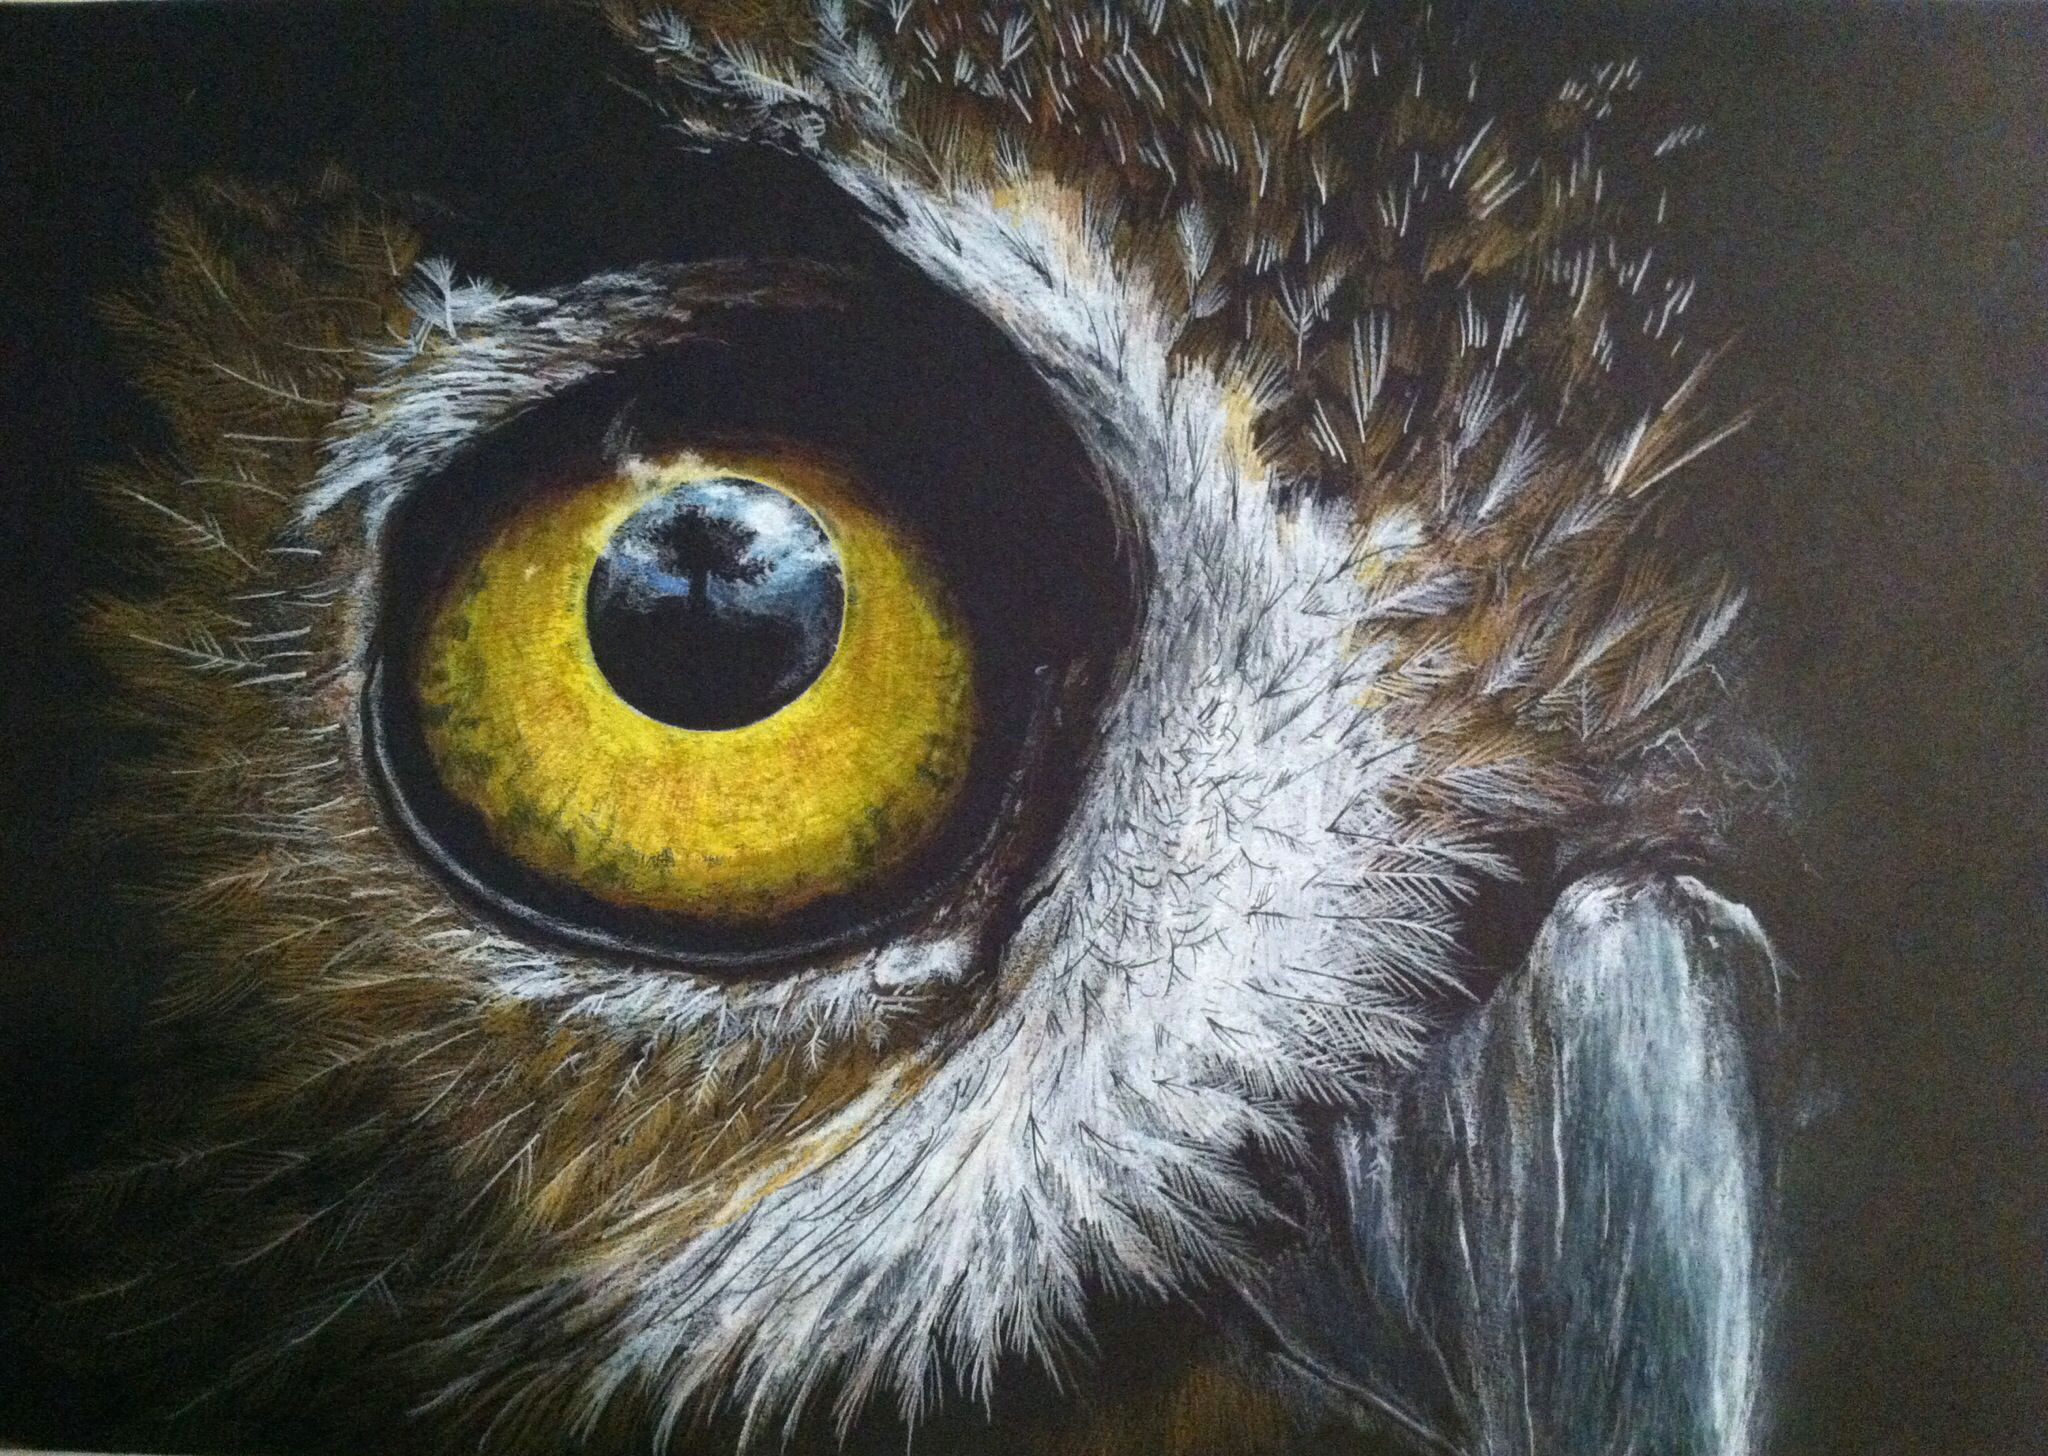 colored pencil on black paper entitled eye of the owl